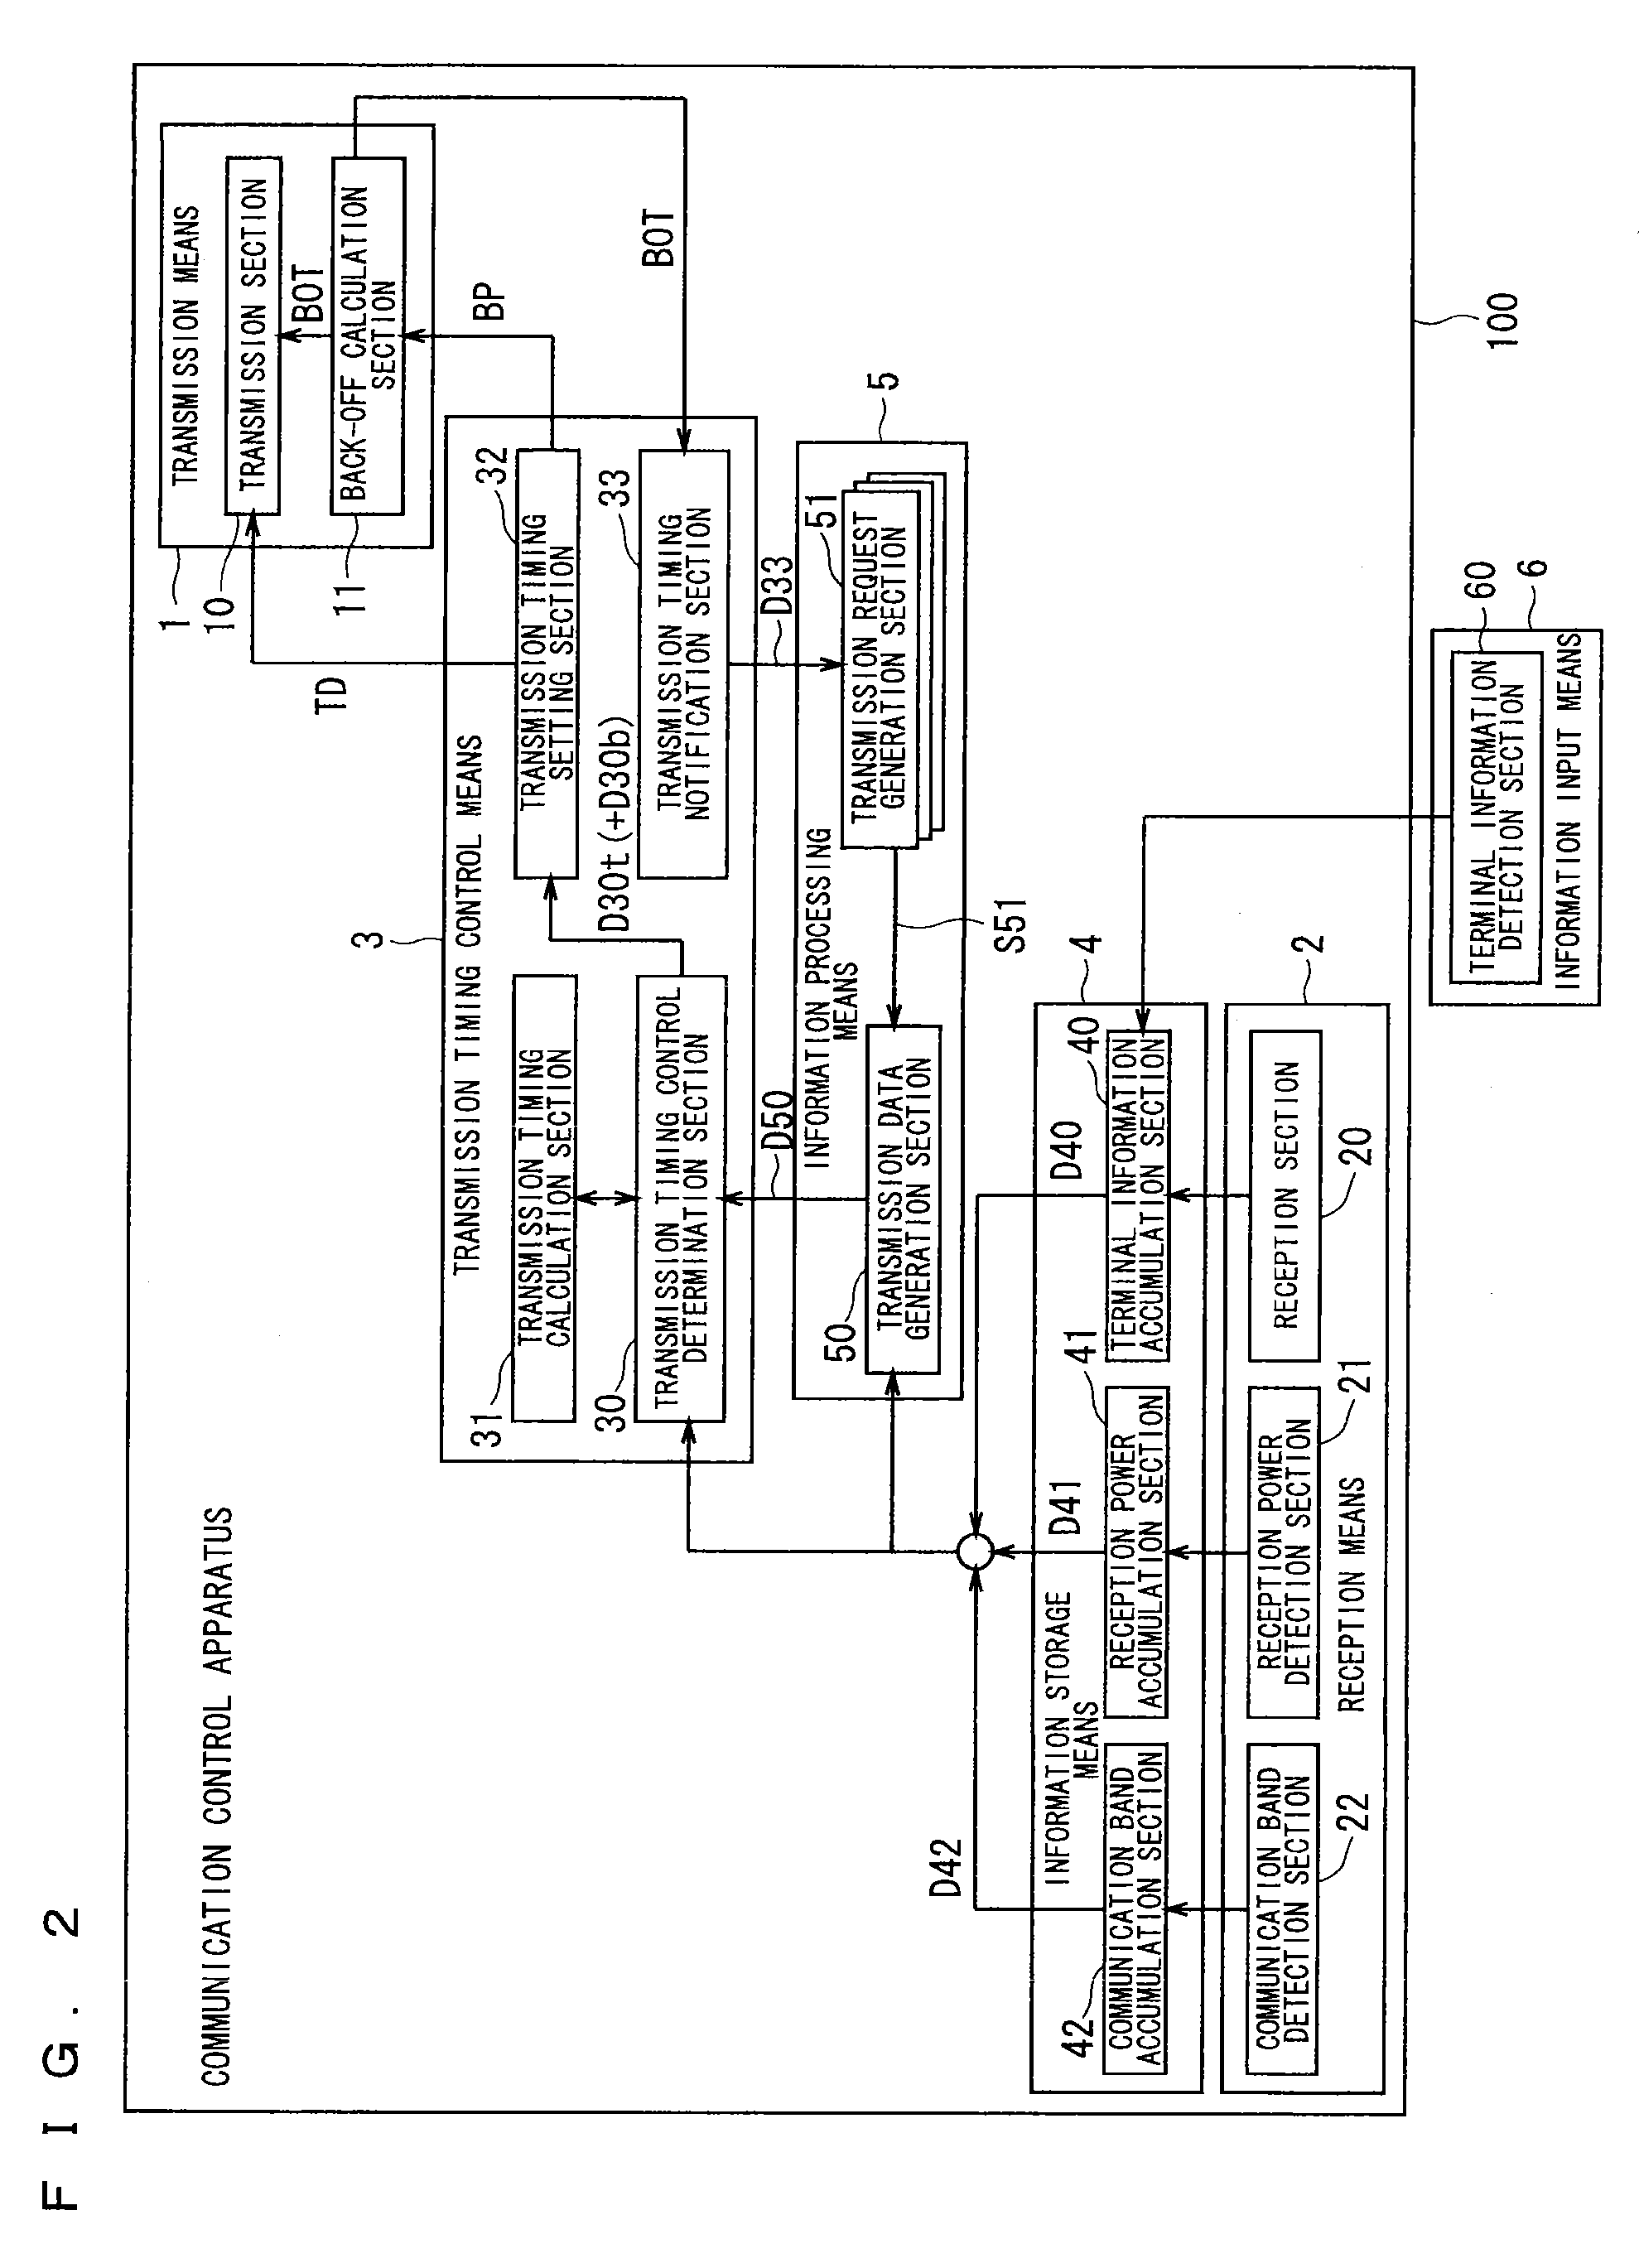 Method and apparatus for retaining a remaining back-off time in CSMA/CA based on a threshold